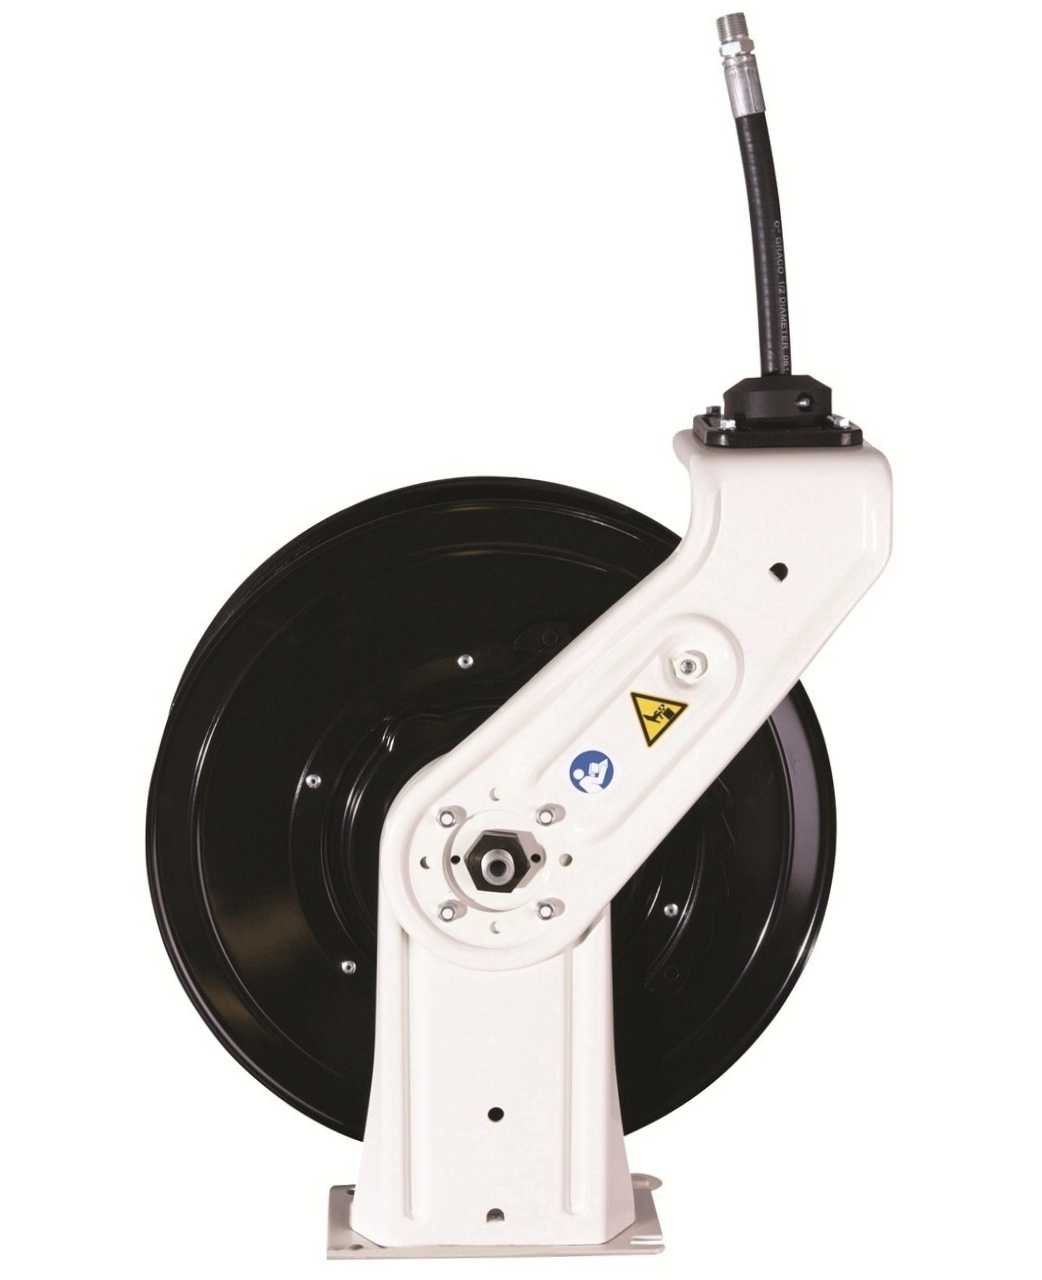 Graco SD 10 Series Hose Reel w/ 3/8 in. X 35 ft. Hose - Air/Water - White (Overhead Mount)